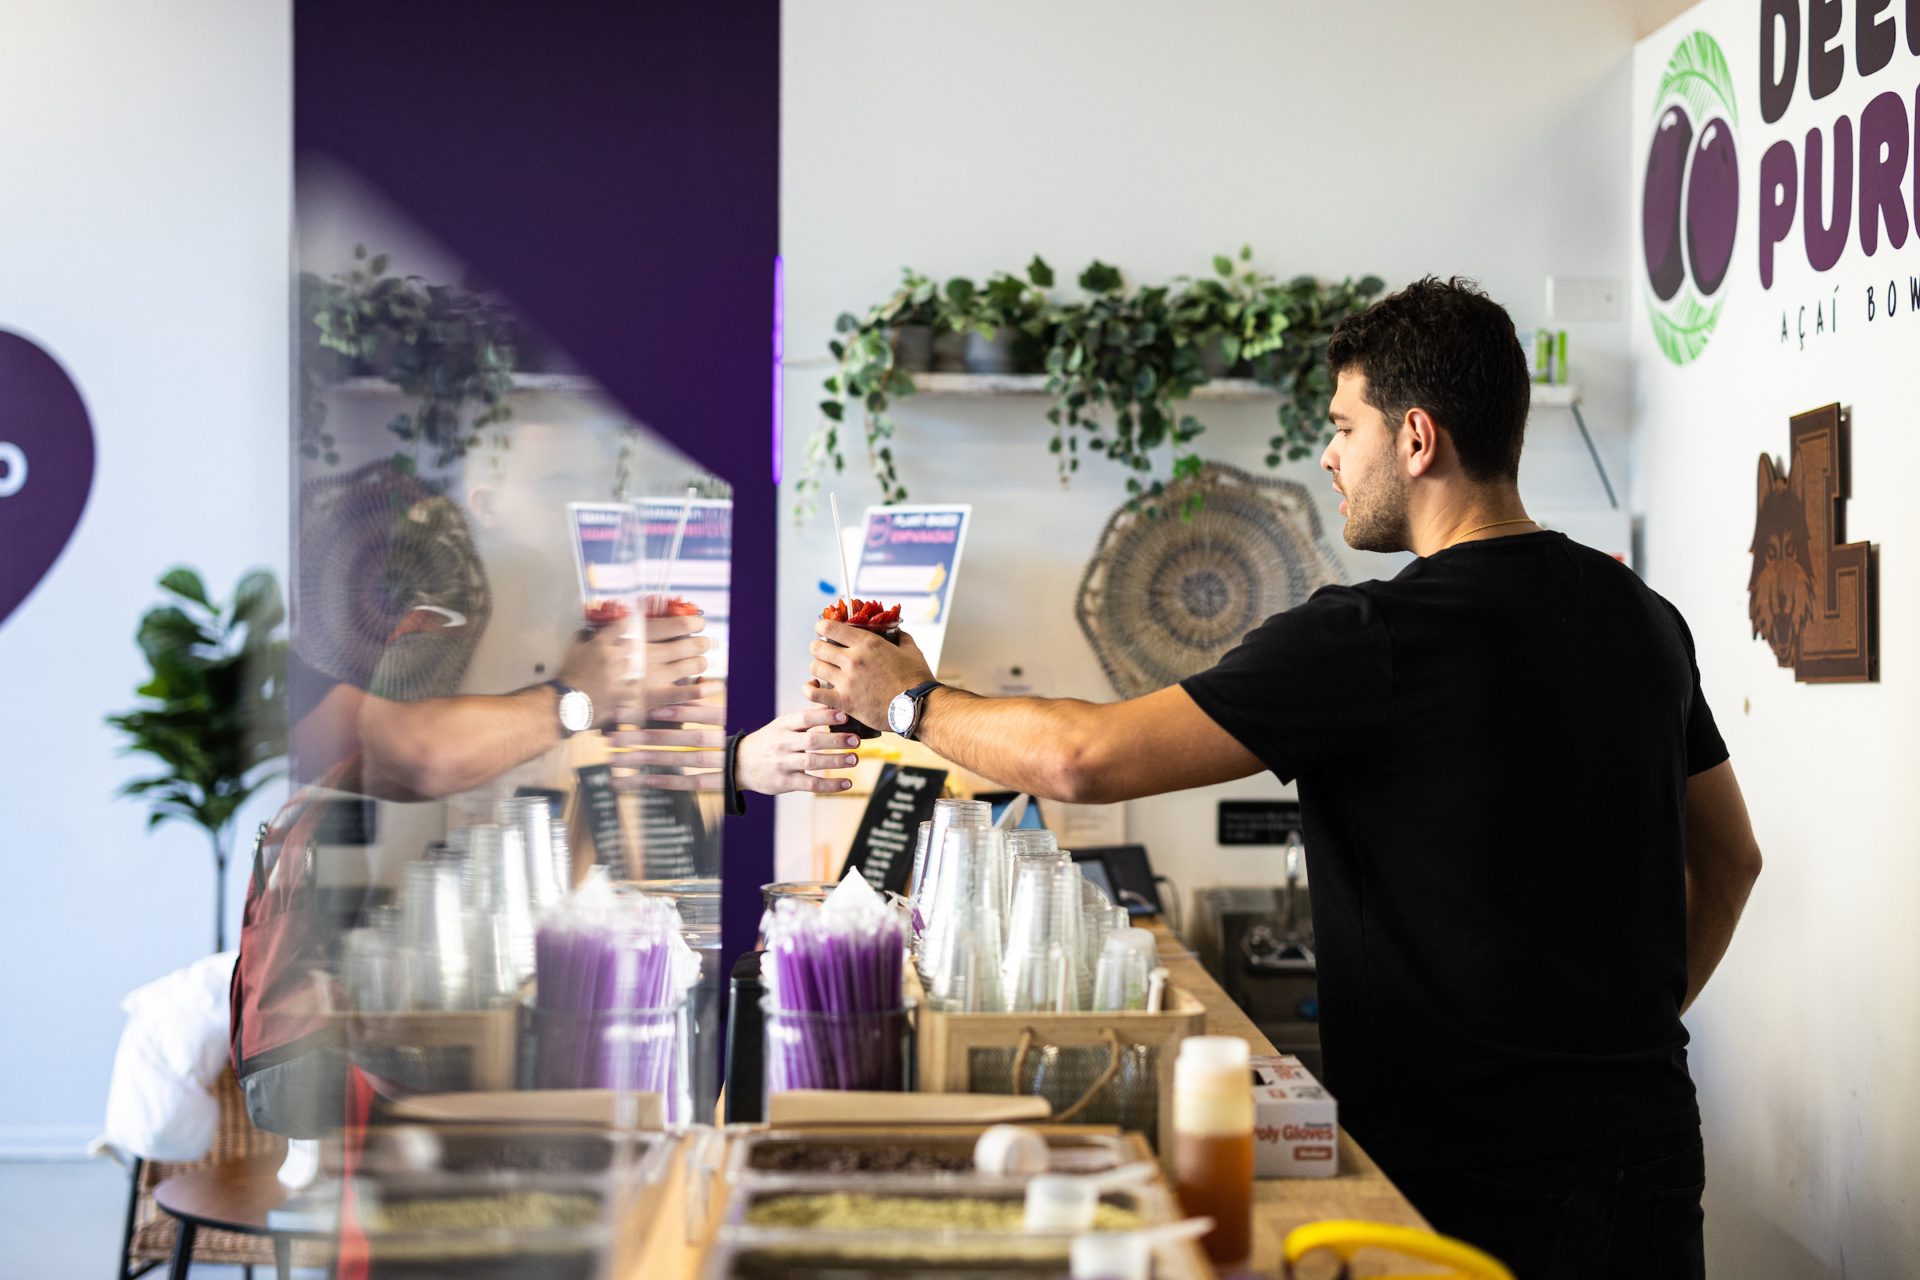 A man wearing a black shirt hands a smoothie across the counter to a customer